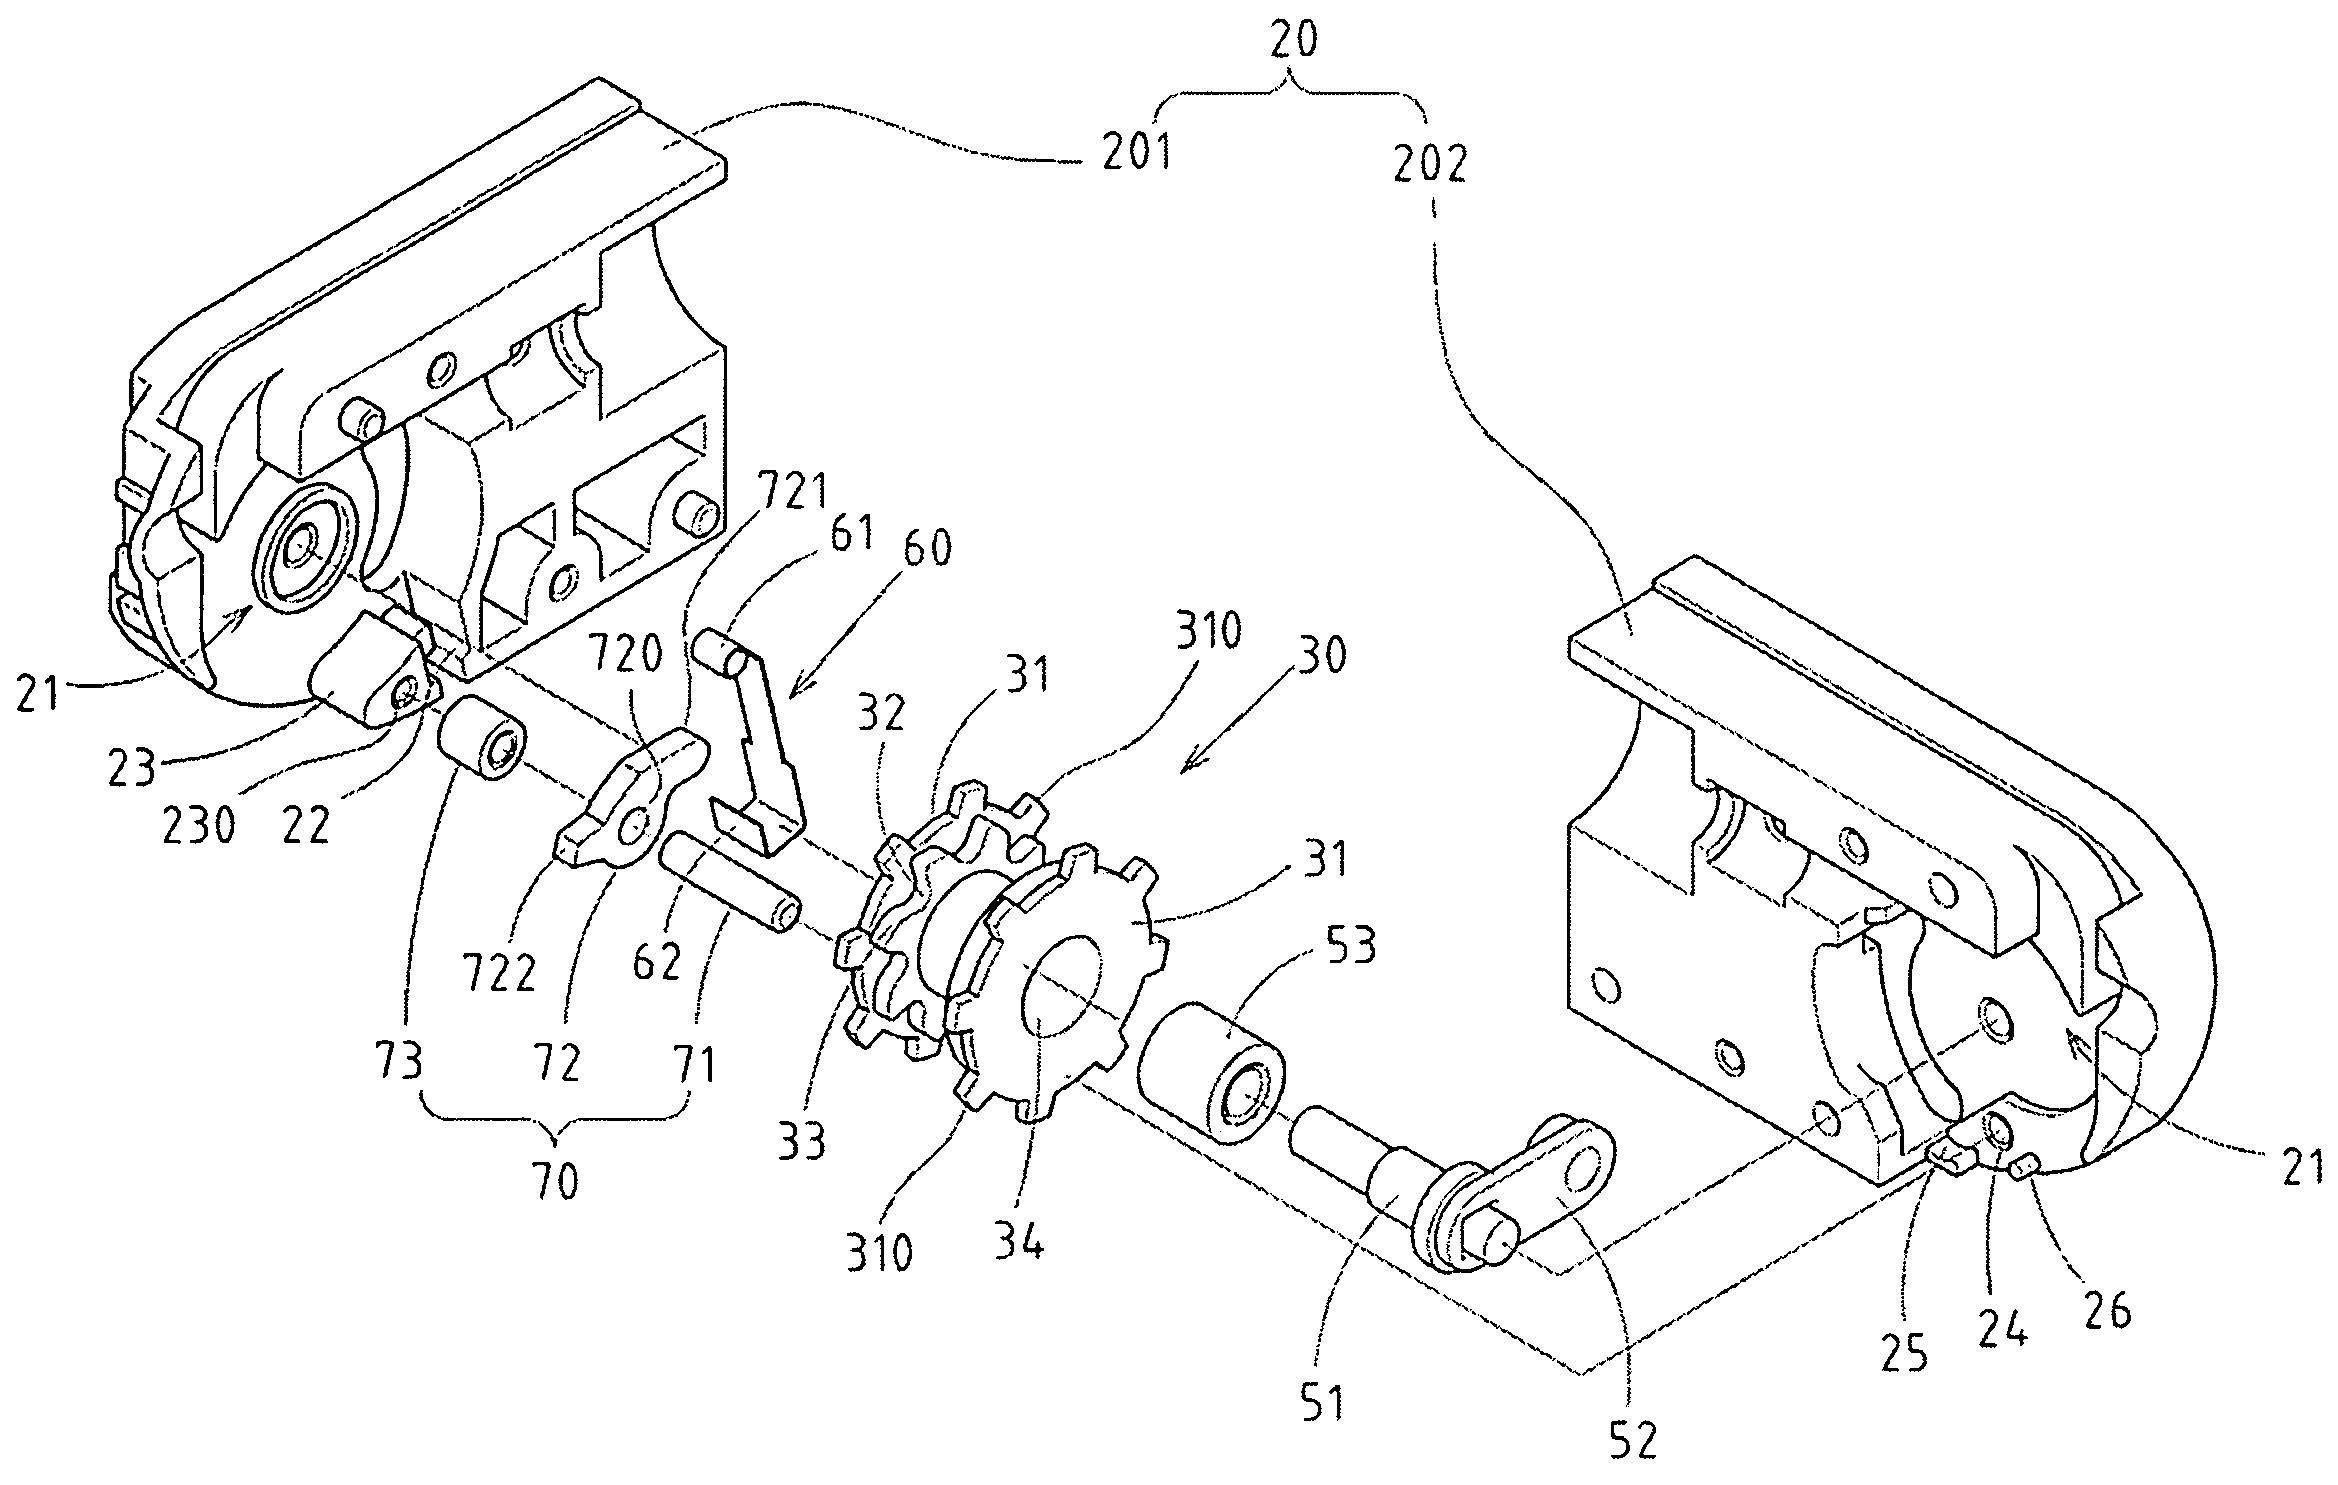 Structure of a screw nailer